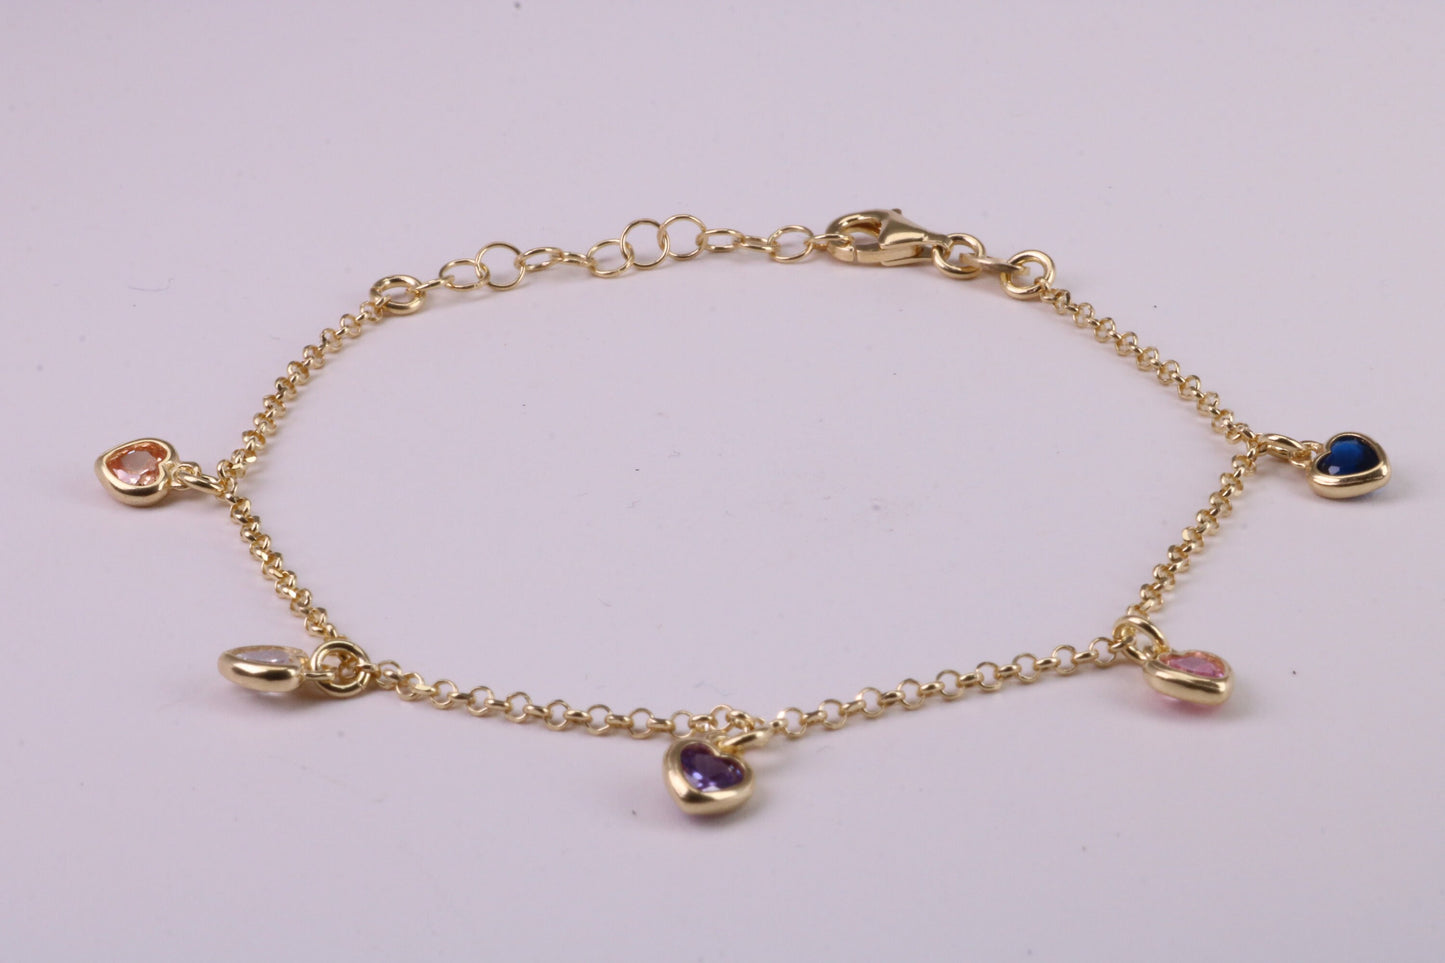 Rainbow Dainty Love Hearts Bracelet, With Length Adjustable Chain, Made from solid Sterling Silver and Further 18ct Yellow Gold Plated